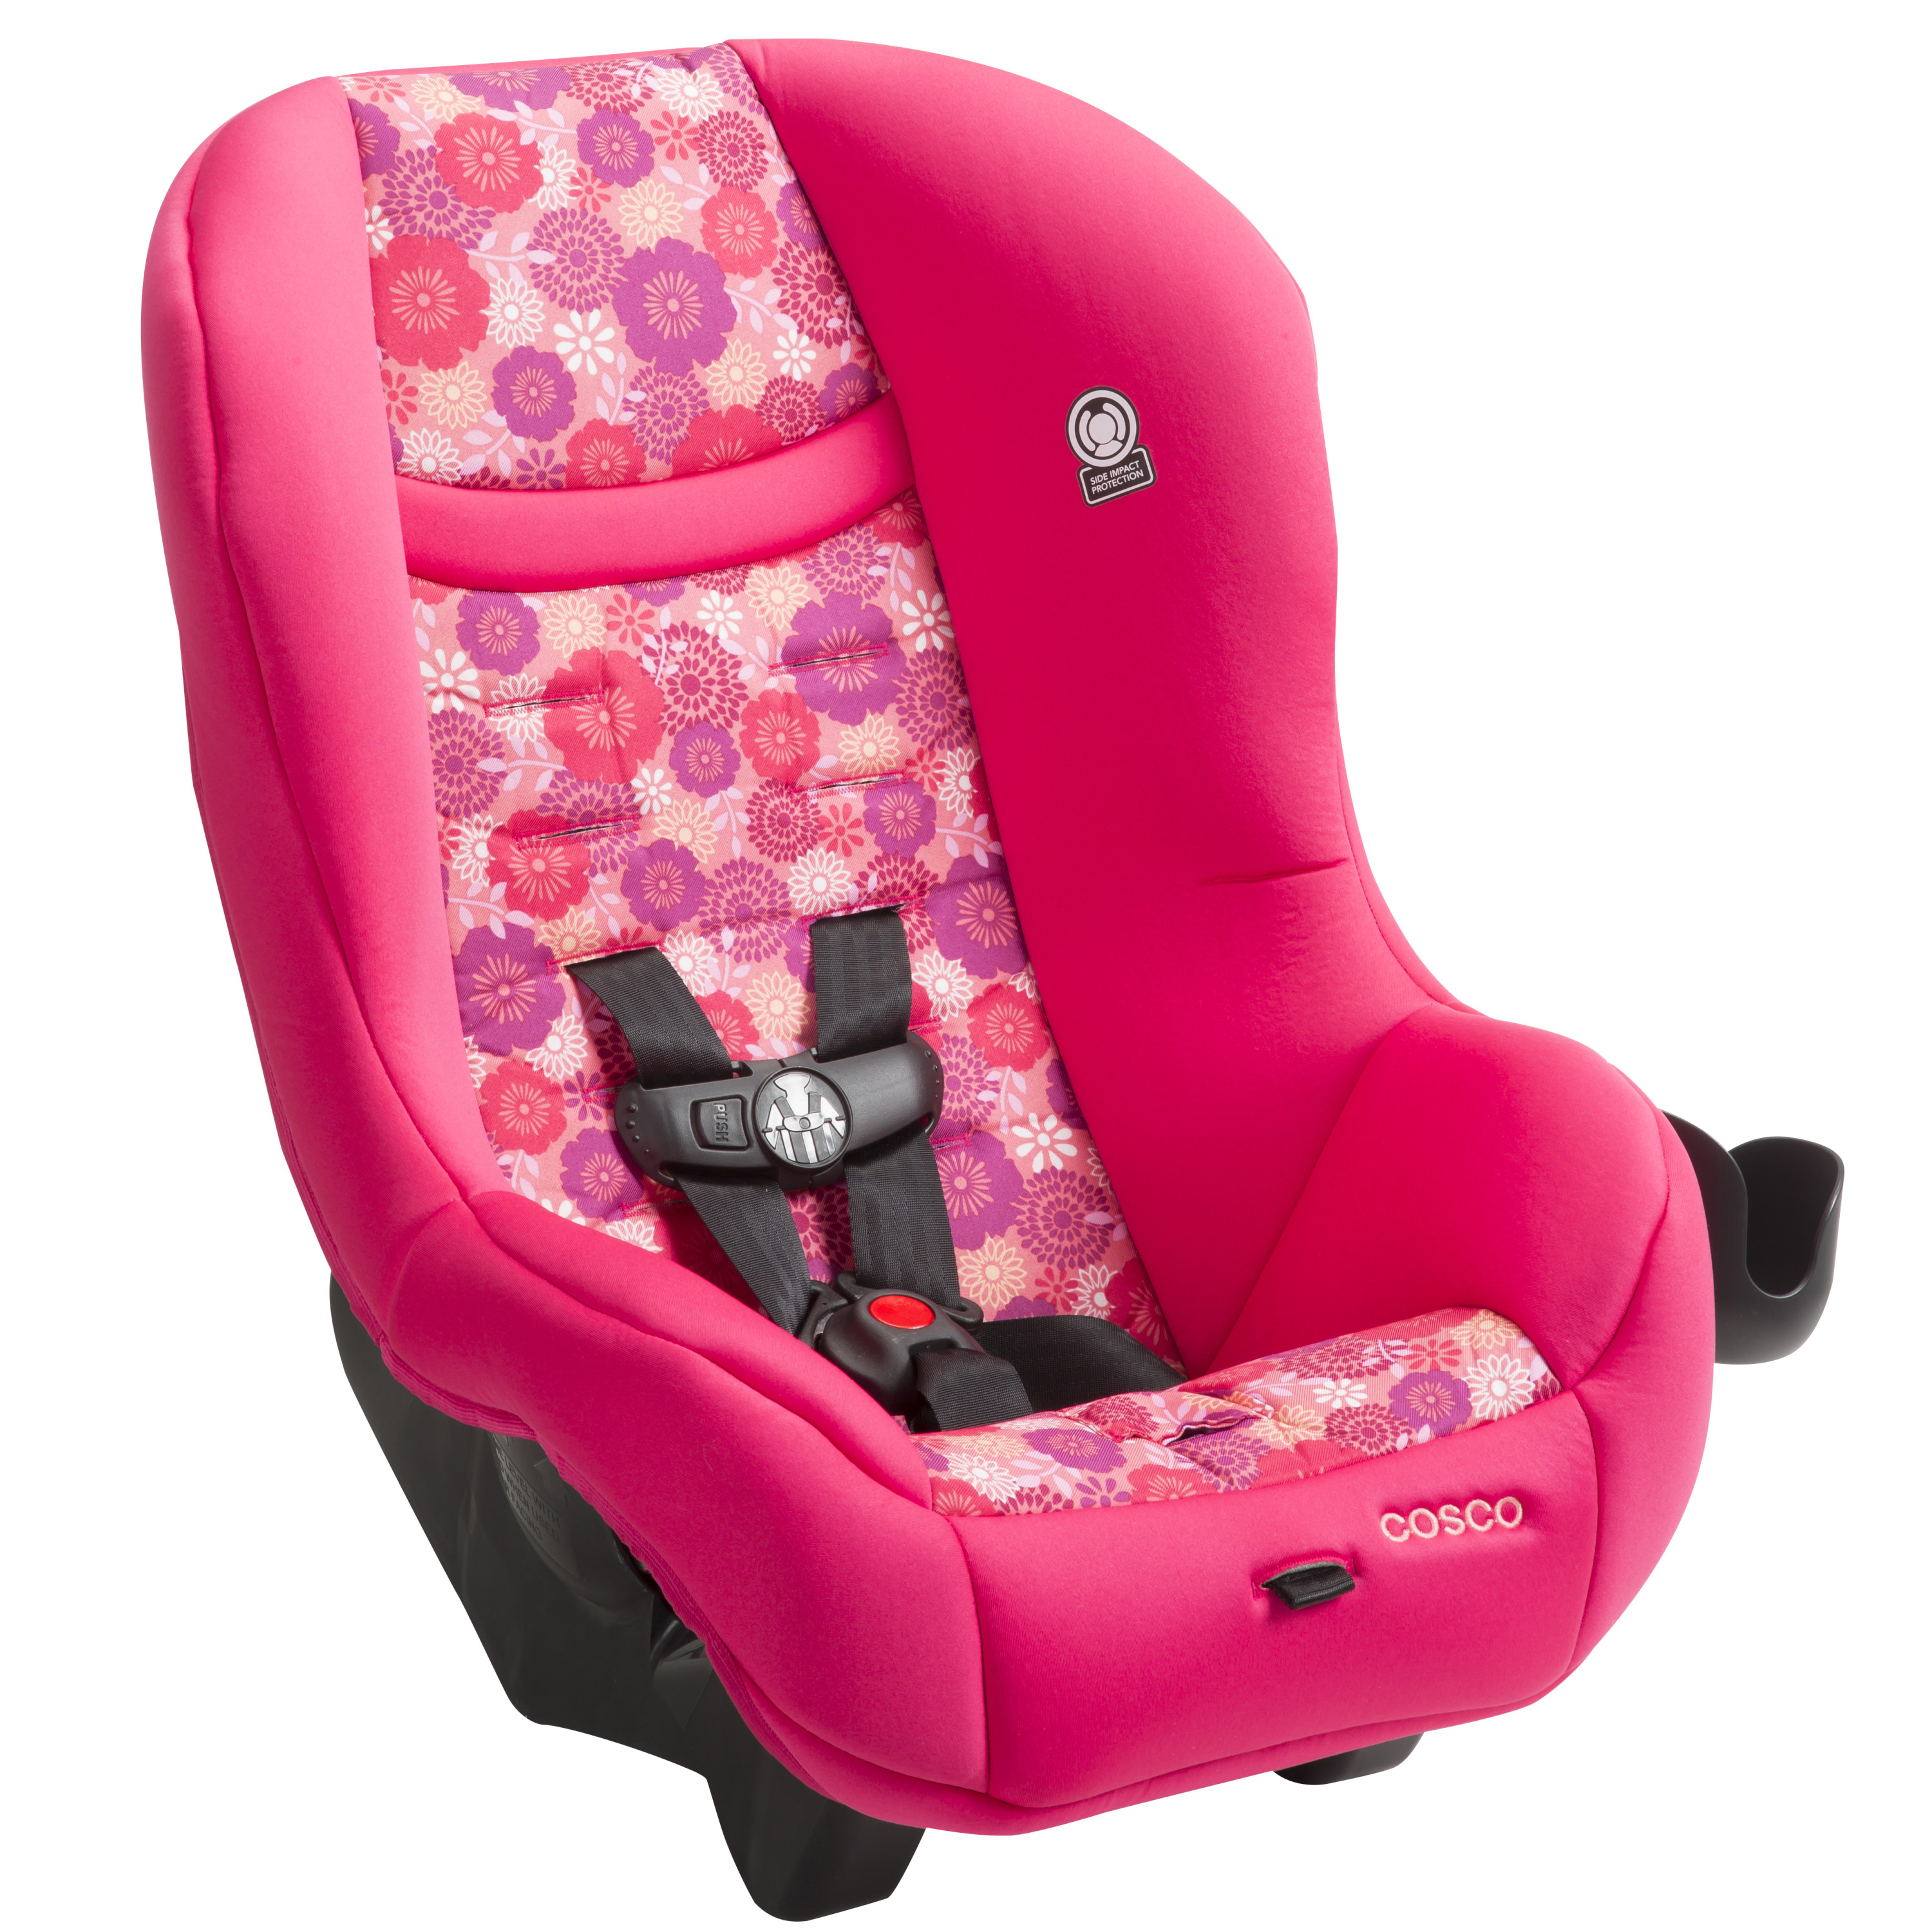 Cosco Scenera Convertible Car Seat, Floral Orchard Blossom Pink - image 6 of 13